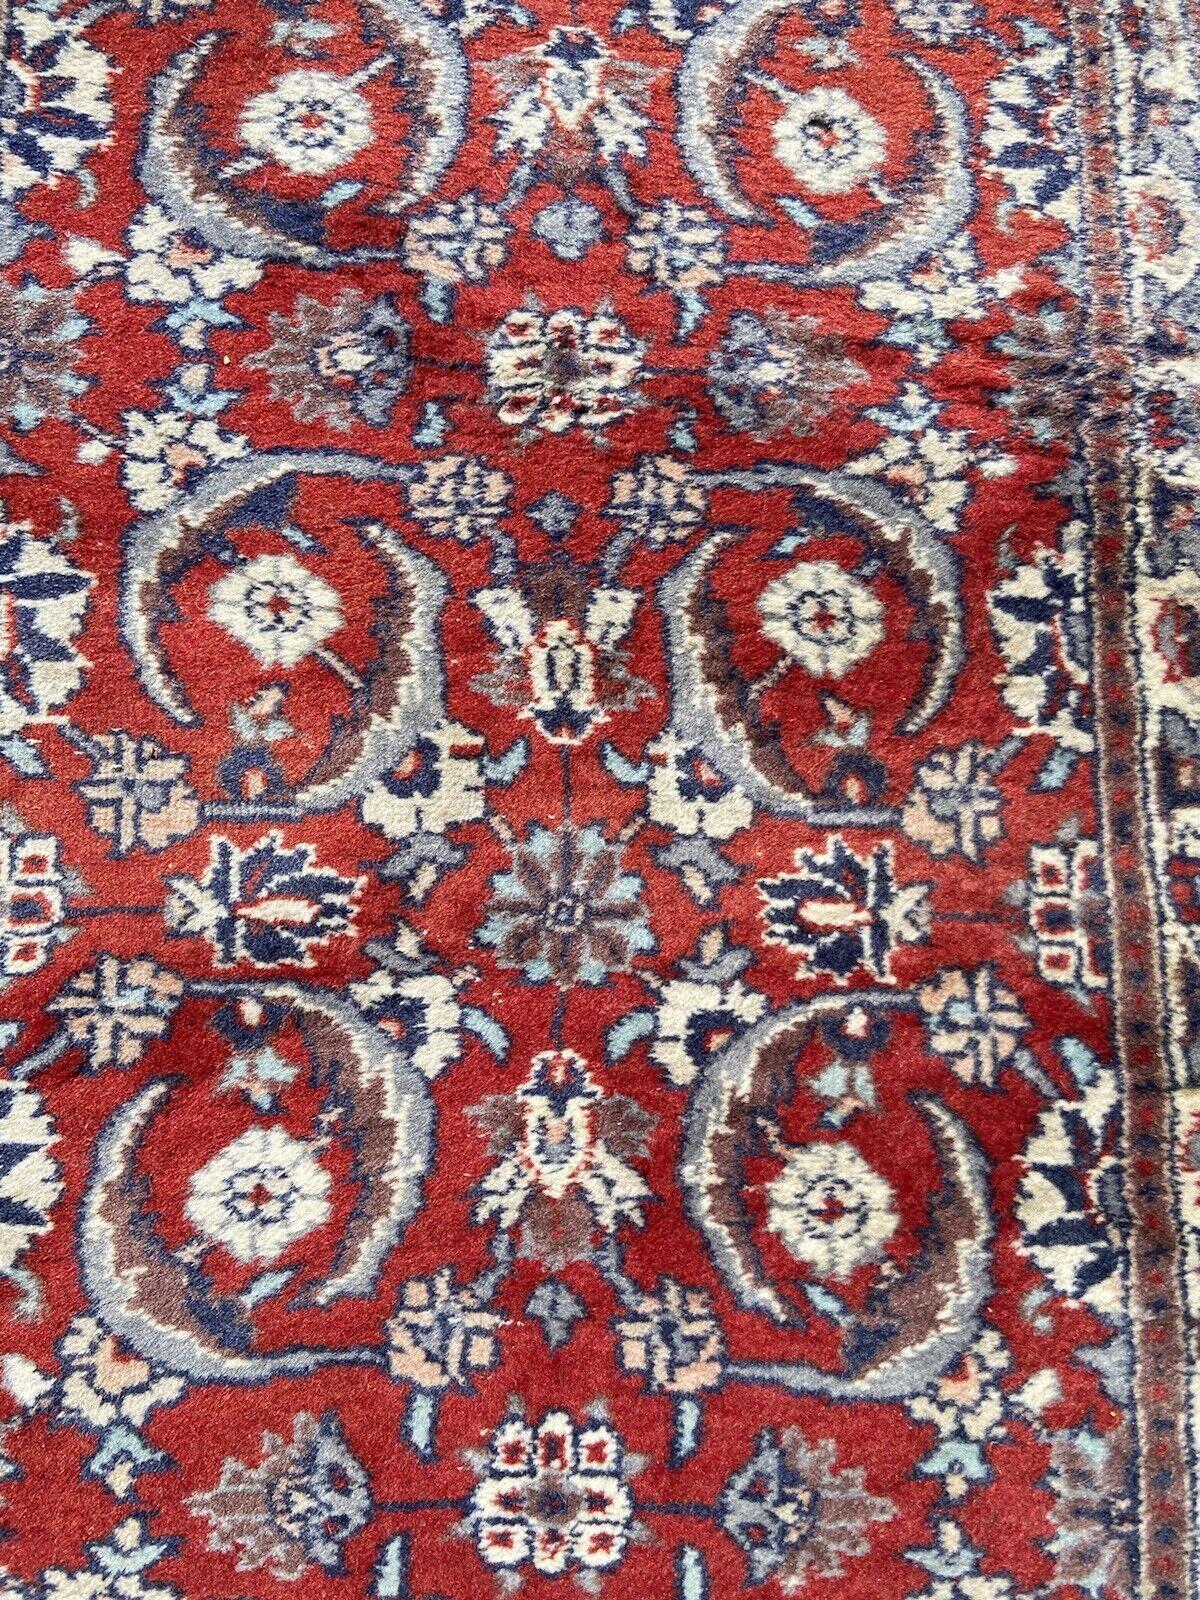 Handmade Vintage Persian Style Kashan Rug 1.5' x 3.7', 1970s - 1S21 For Sale 2